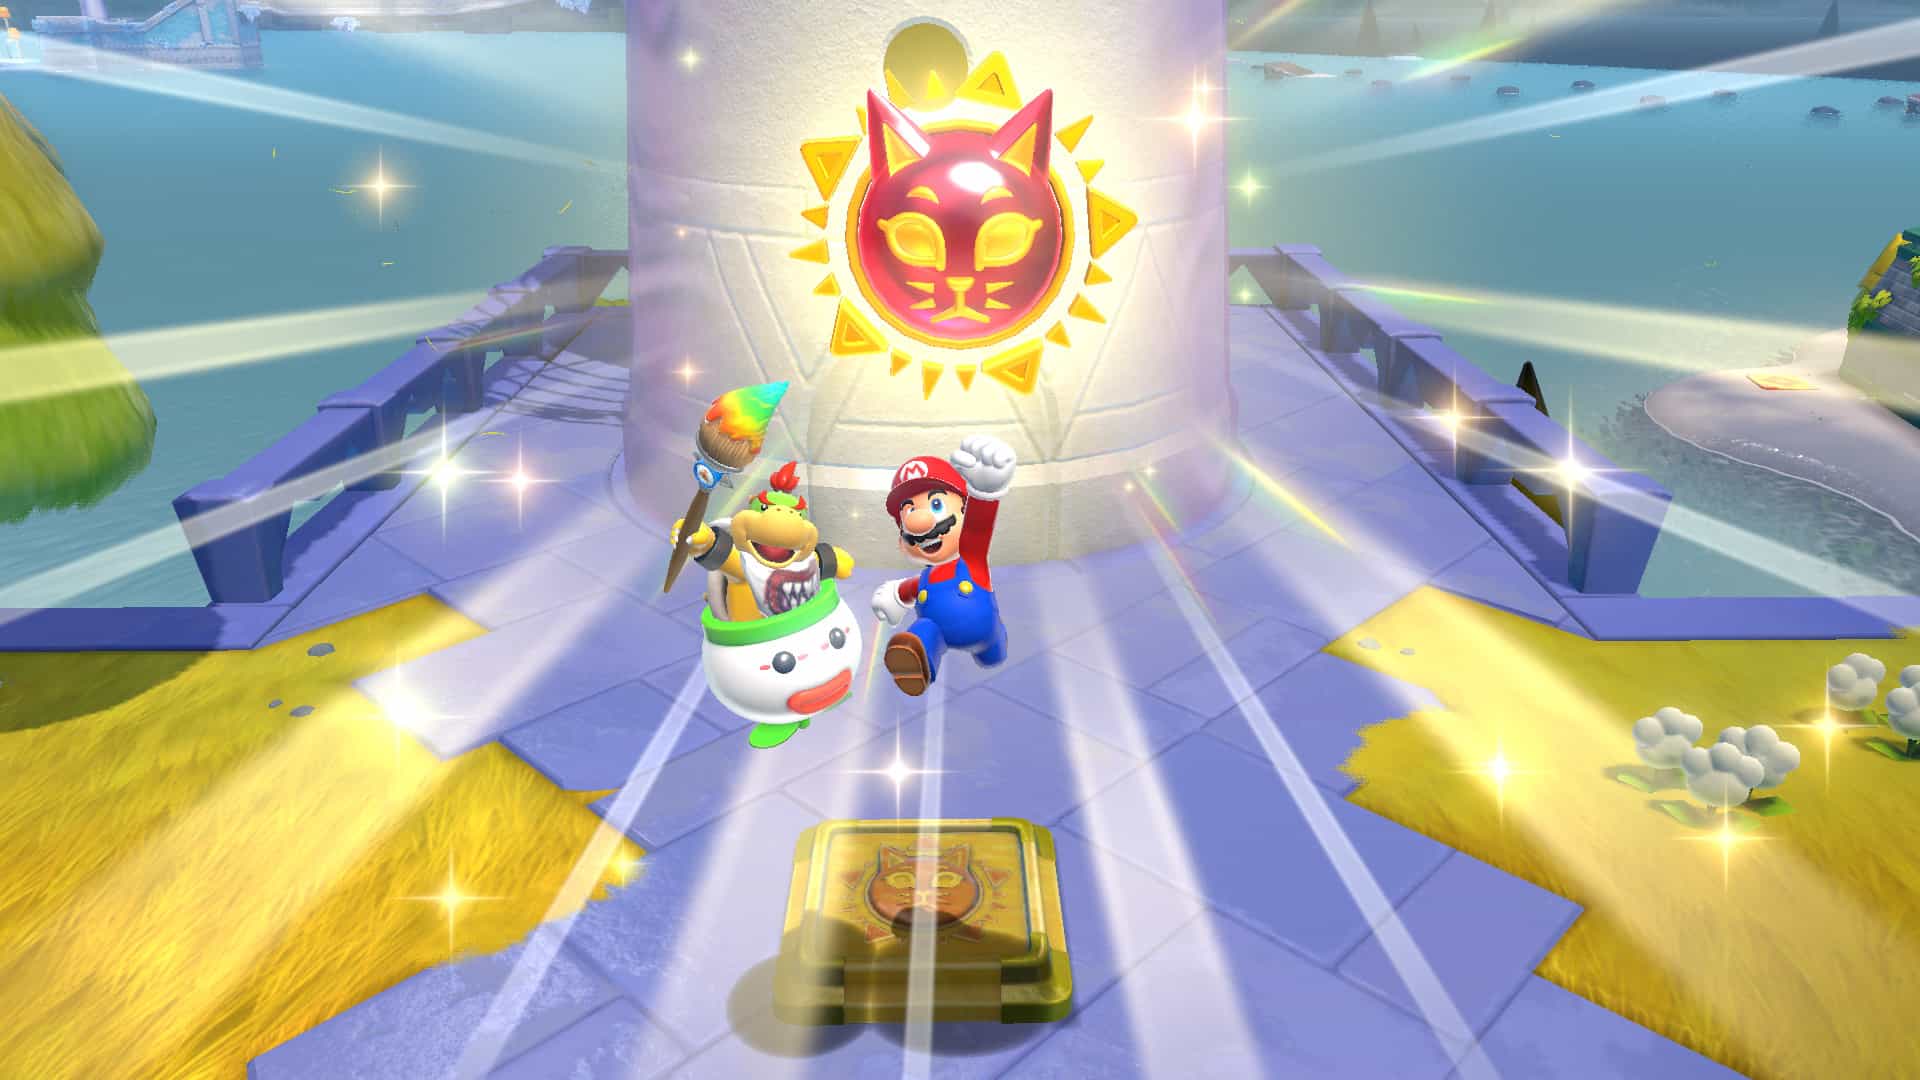 A Nintendo promotional image for Super Mario 3D World + Bowser's Fury.